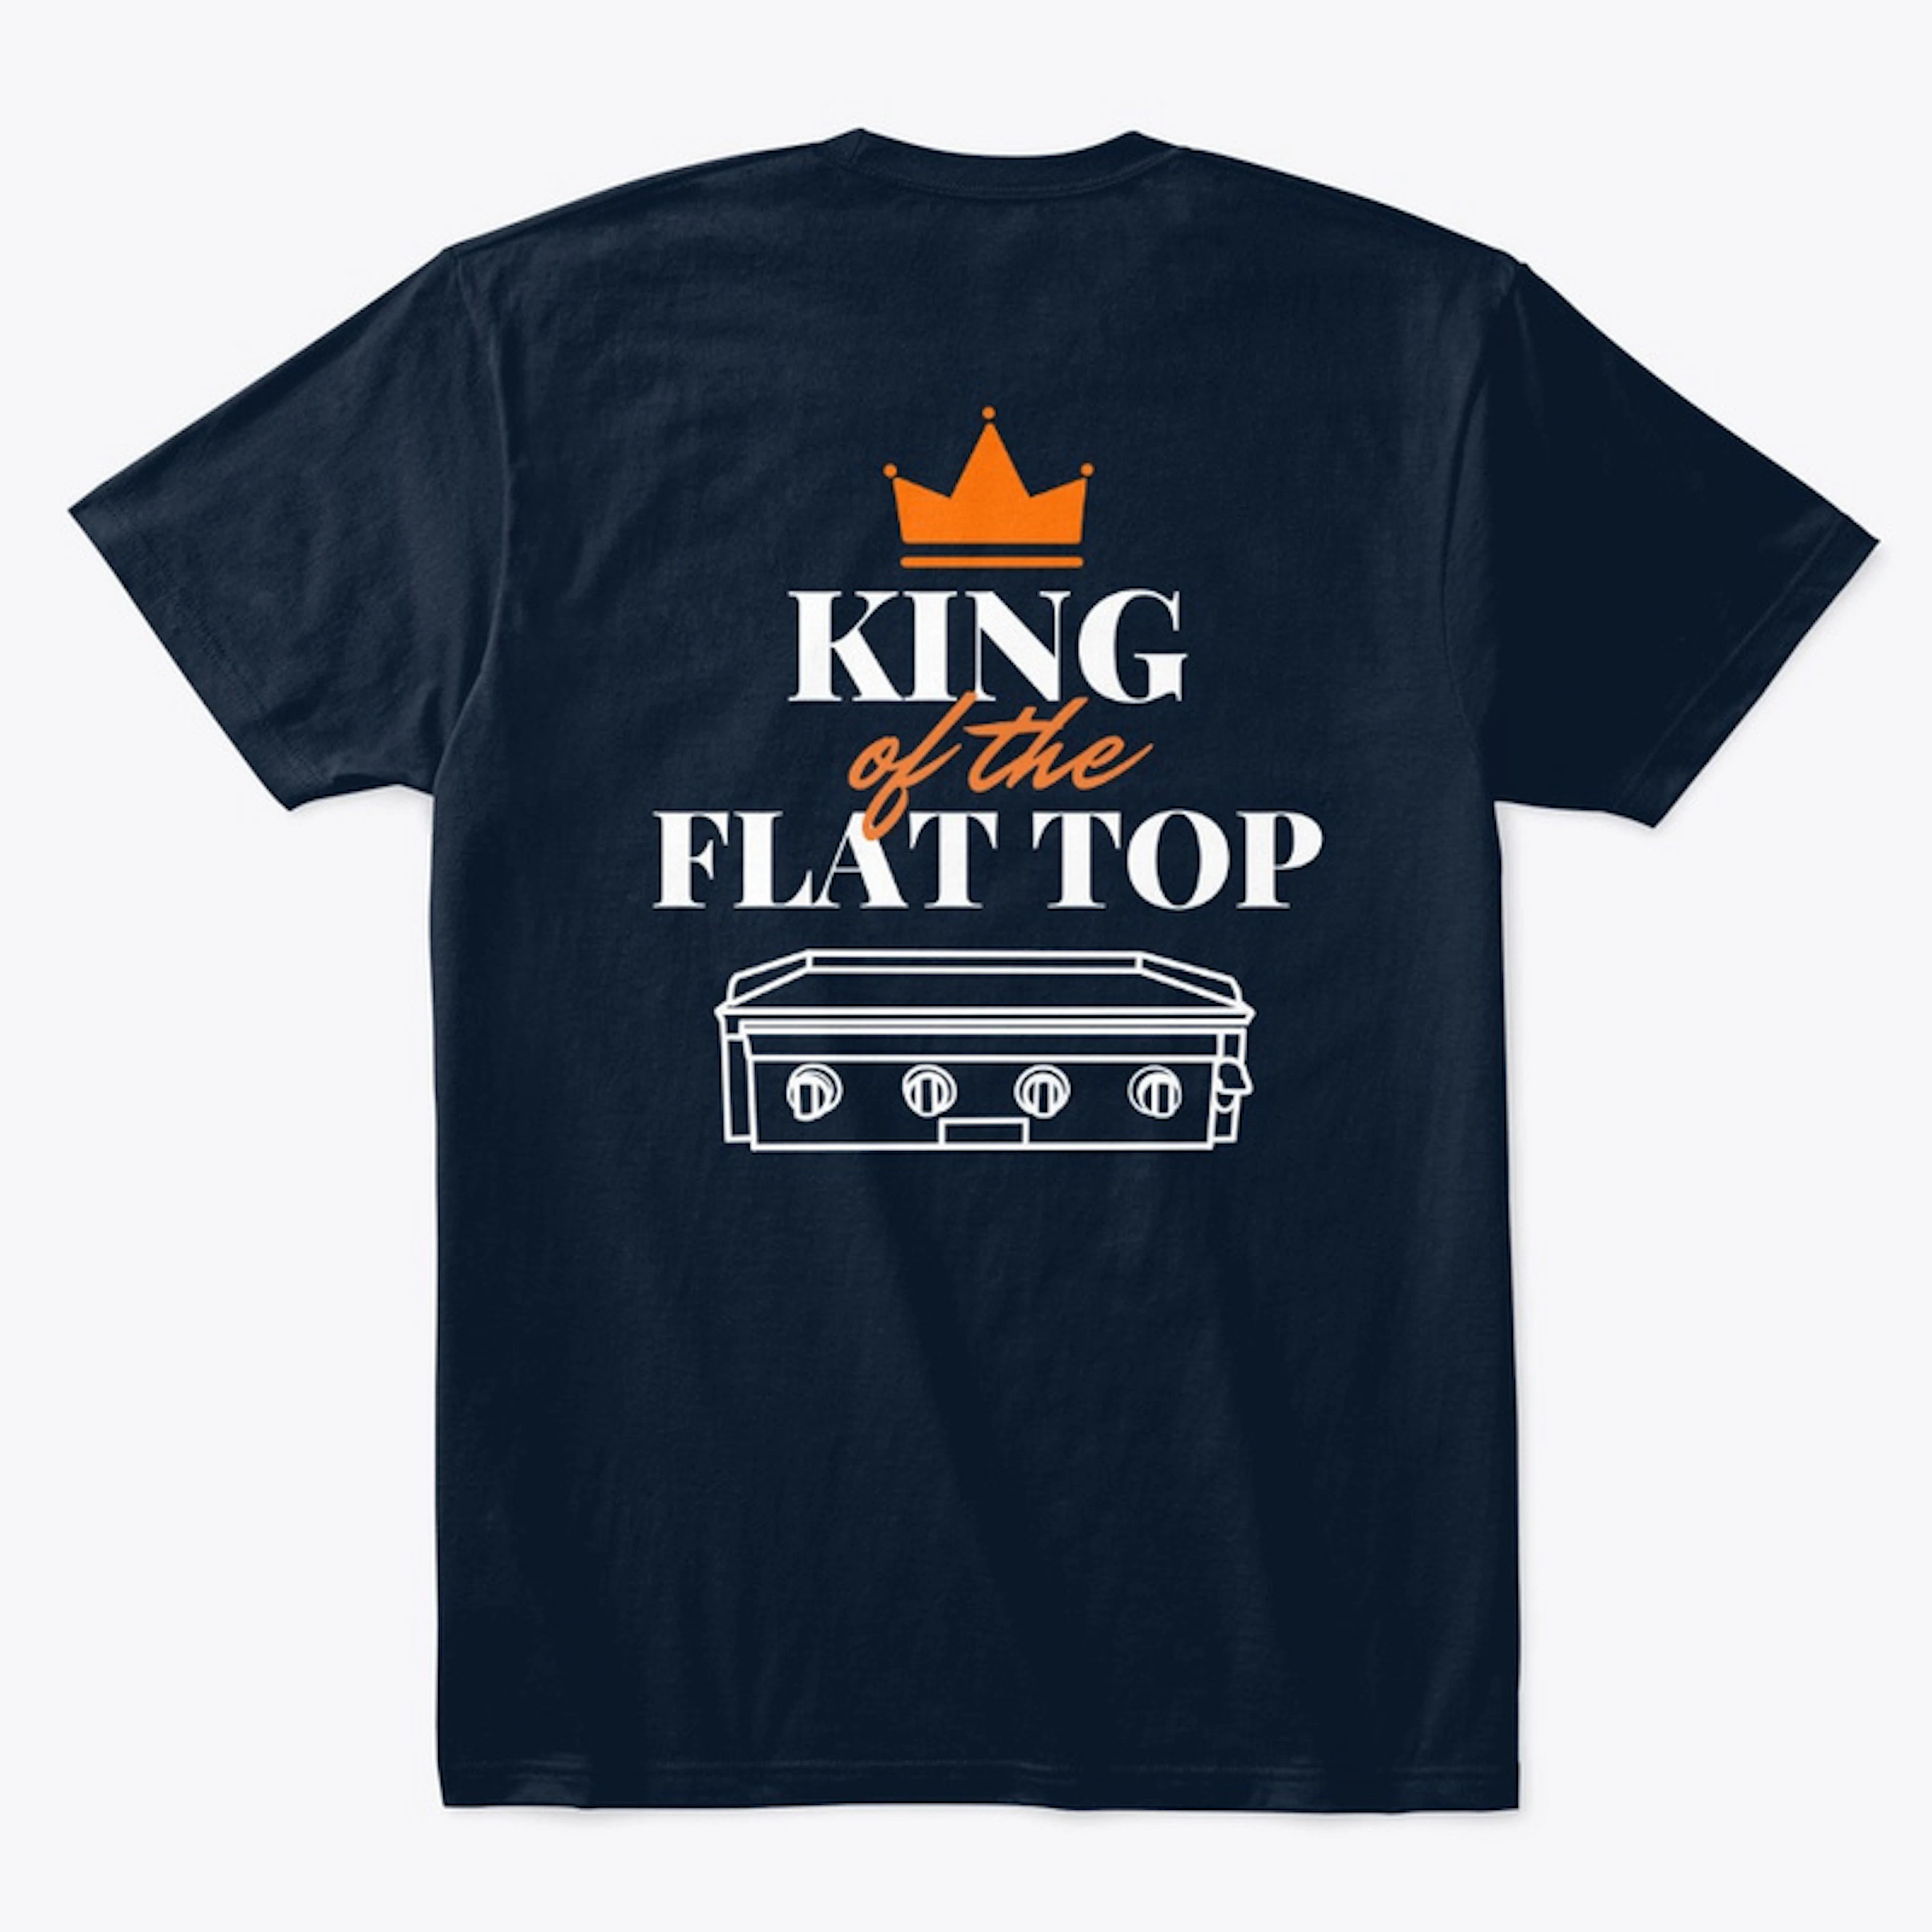 "King of the Flat Top" T-Shirt